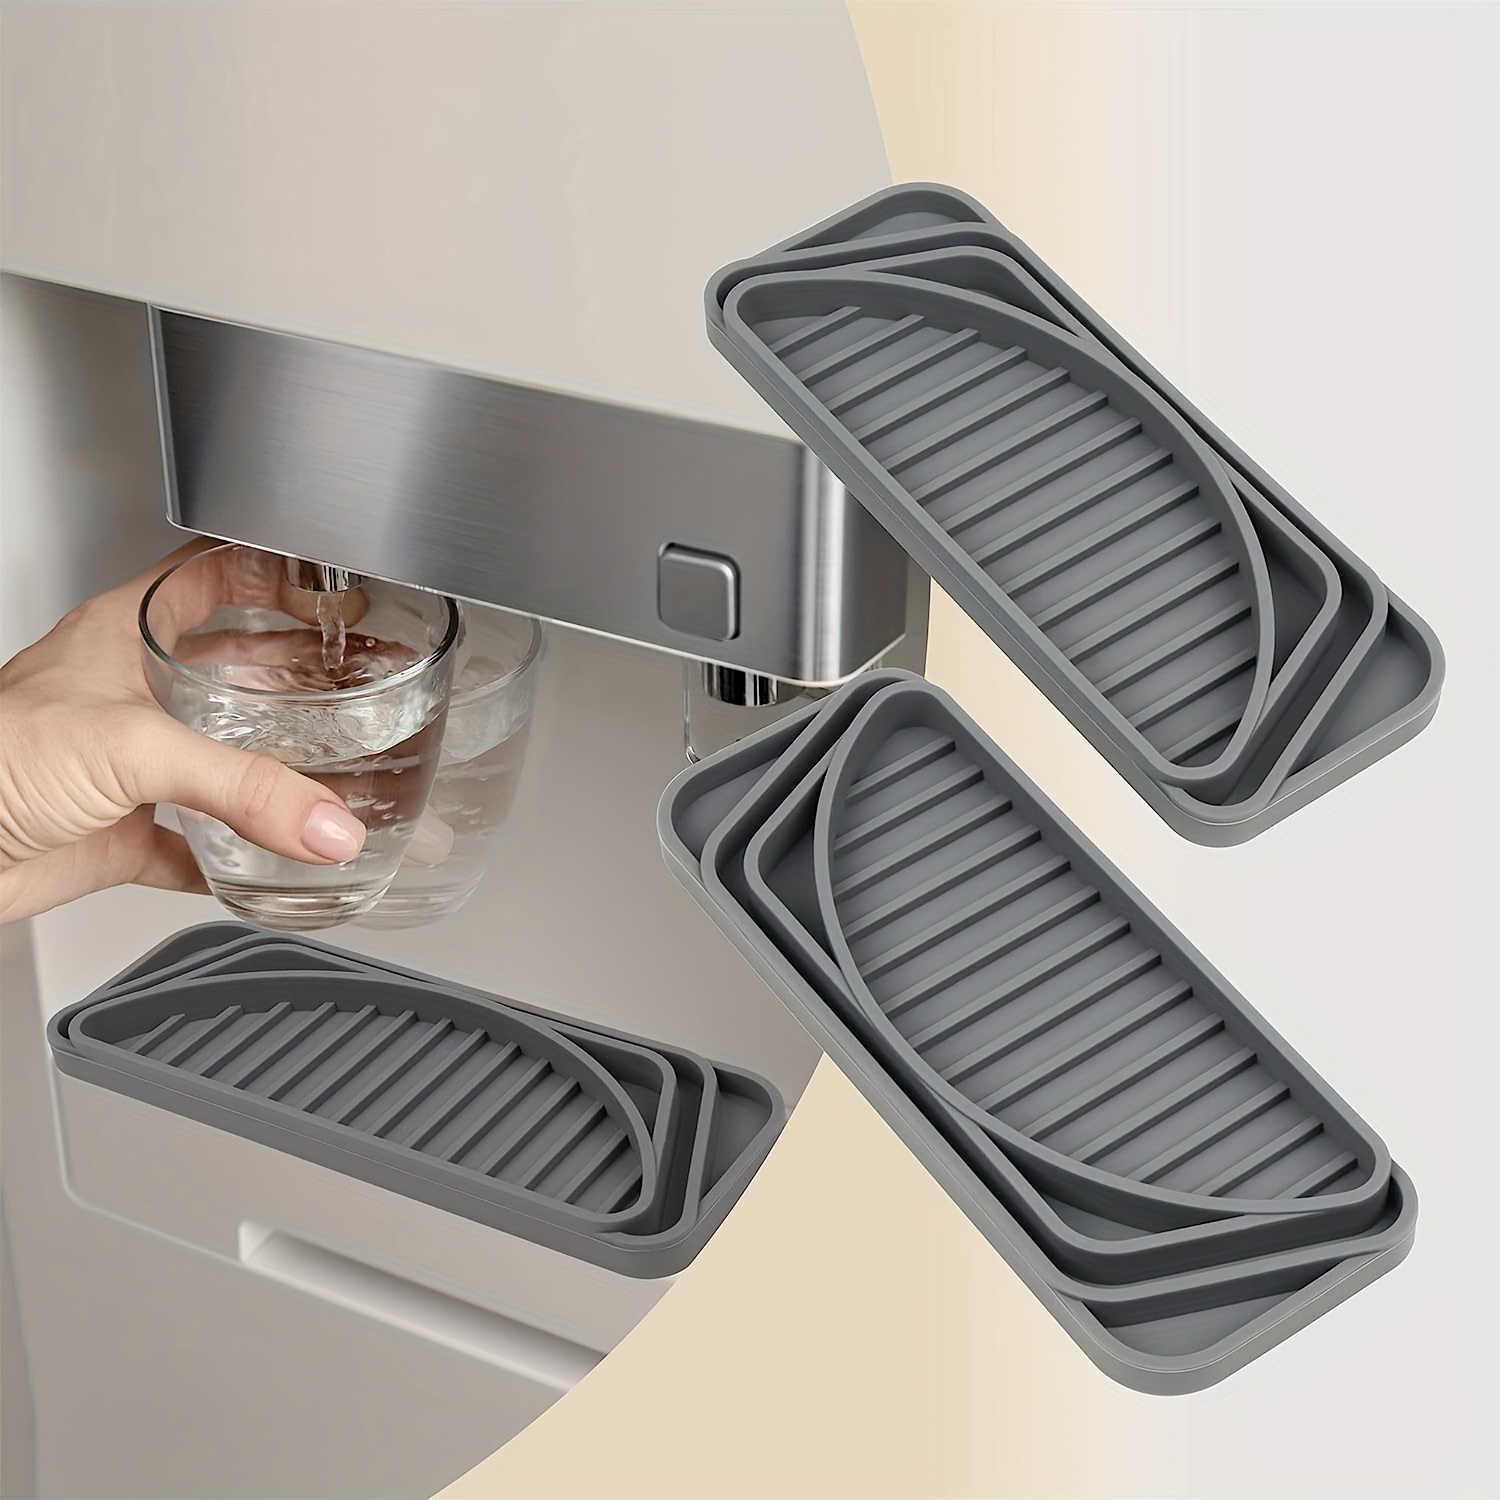 TAUPTT 2 Refrigerator Drip Catcher for Water Tray, The Fridge Drip Tray  Protects The Refrigerator Water Dispenser and Ice Cube Tray from